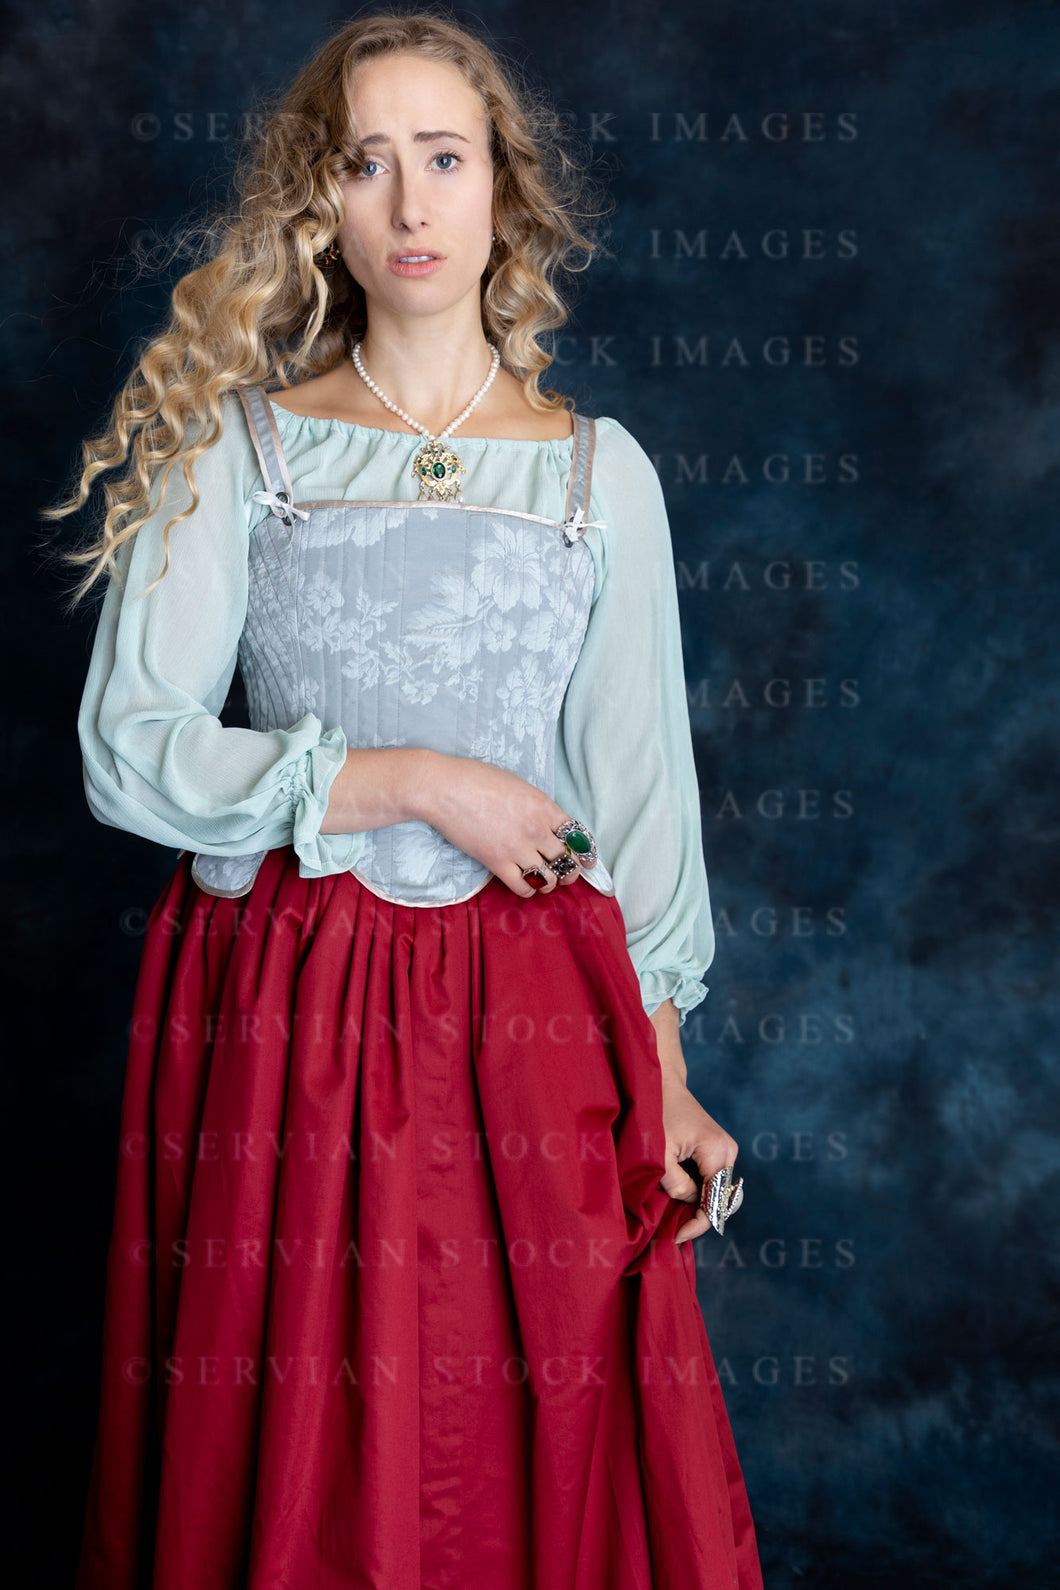 Renaissance or Tudor woman in a brocade corset, and red skirt (Kat 2911)